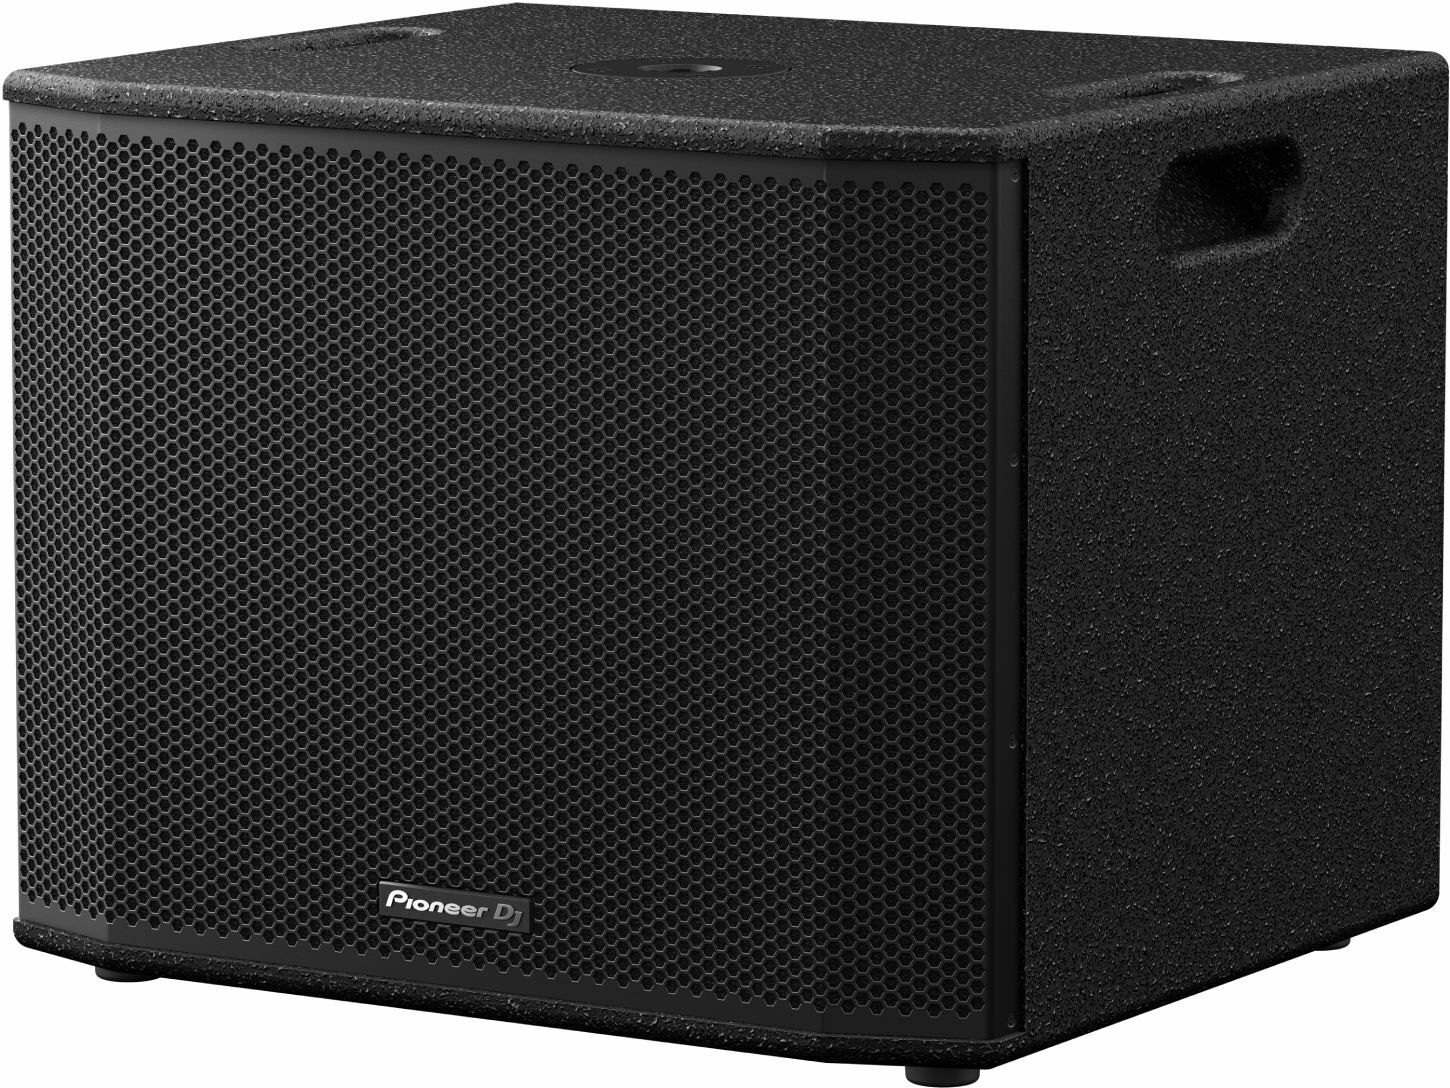 Pioneer Dj Xprs 1152 S - Active subwoofer - Main picture